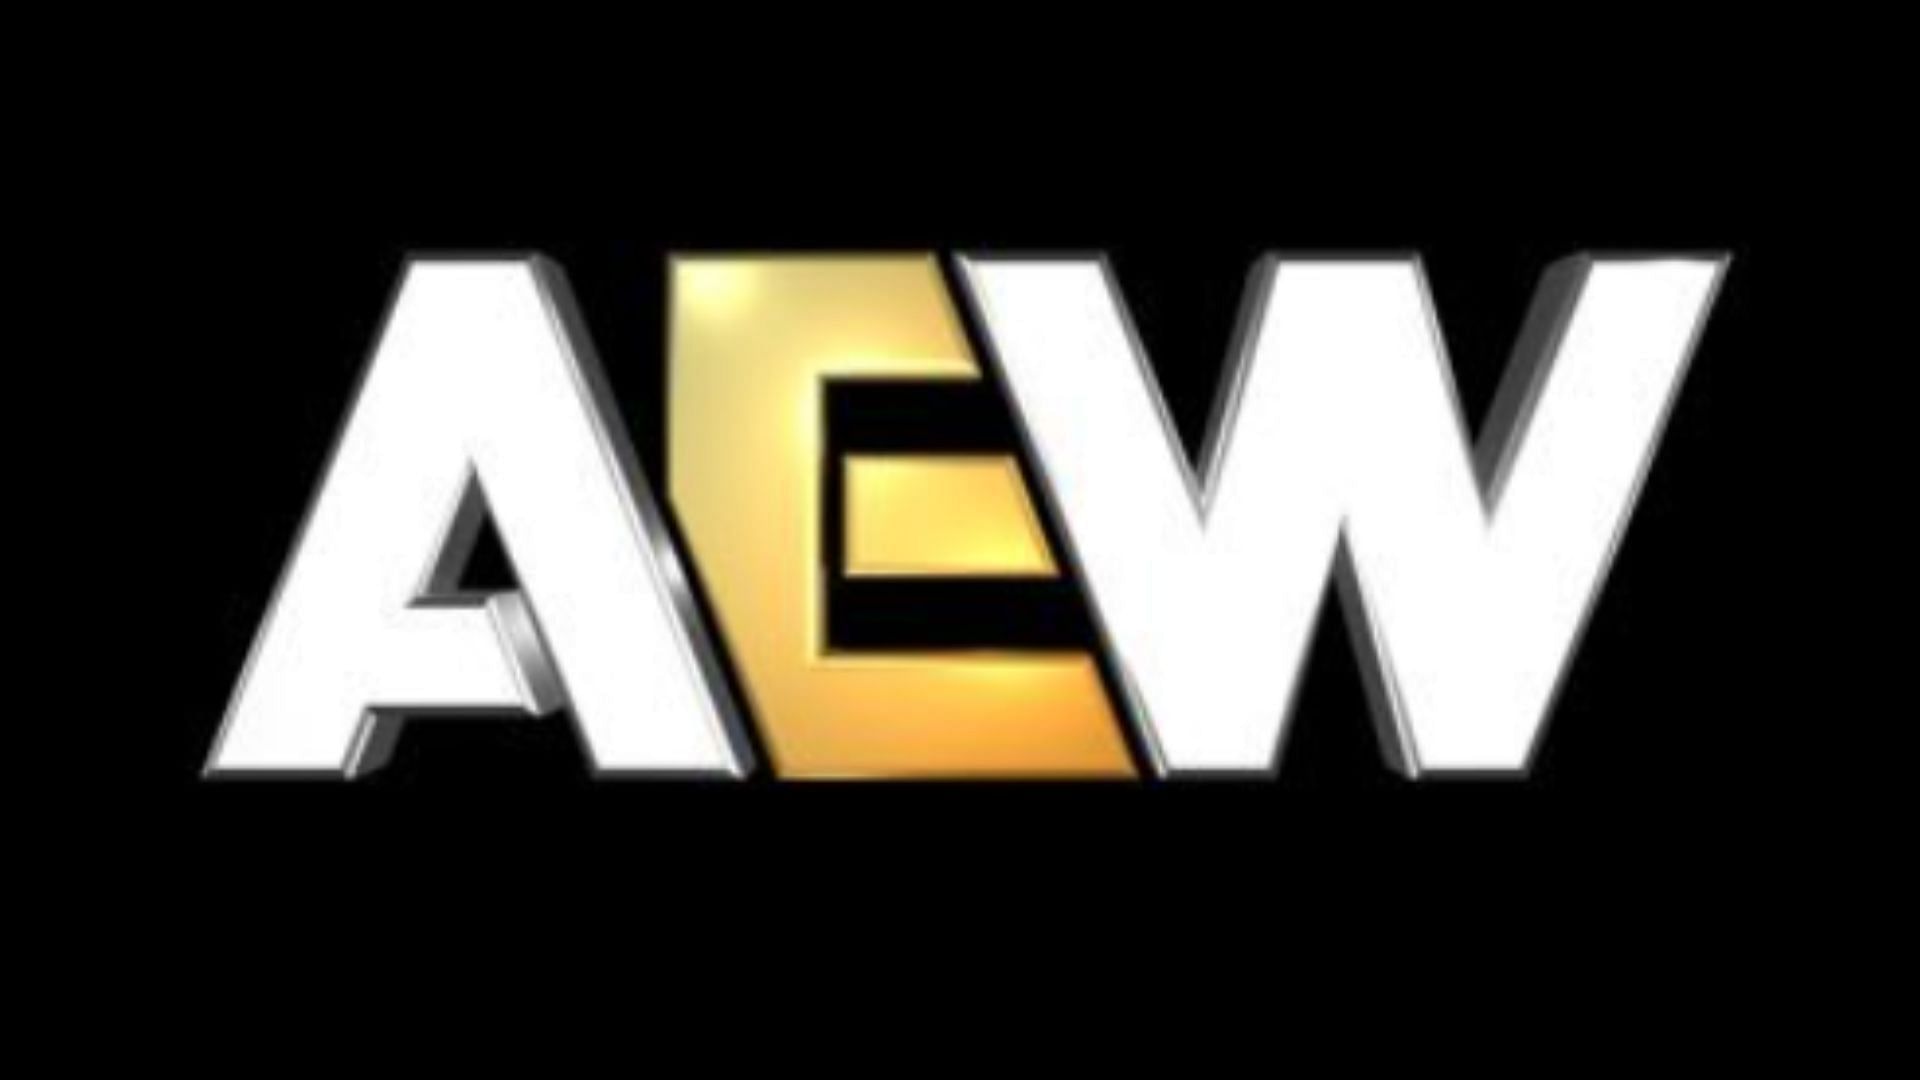 AEW produces top-tier professional wrestling [Image Credits: AEW